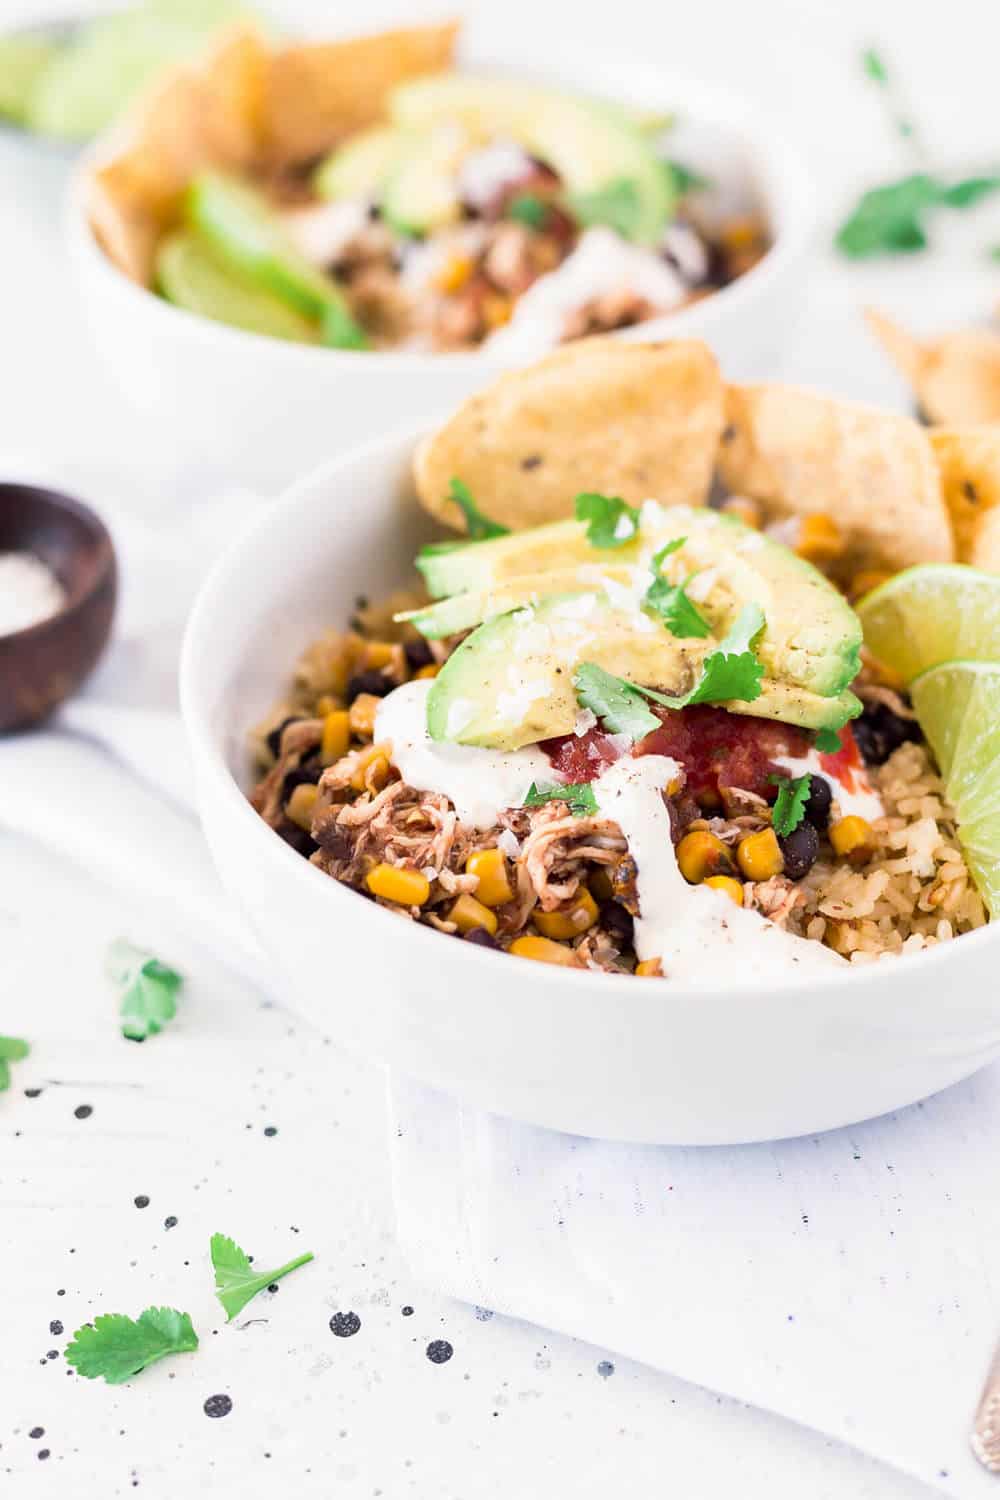 Chicken taco bowl topped with sliced avocado, limes and tortilla chips.